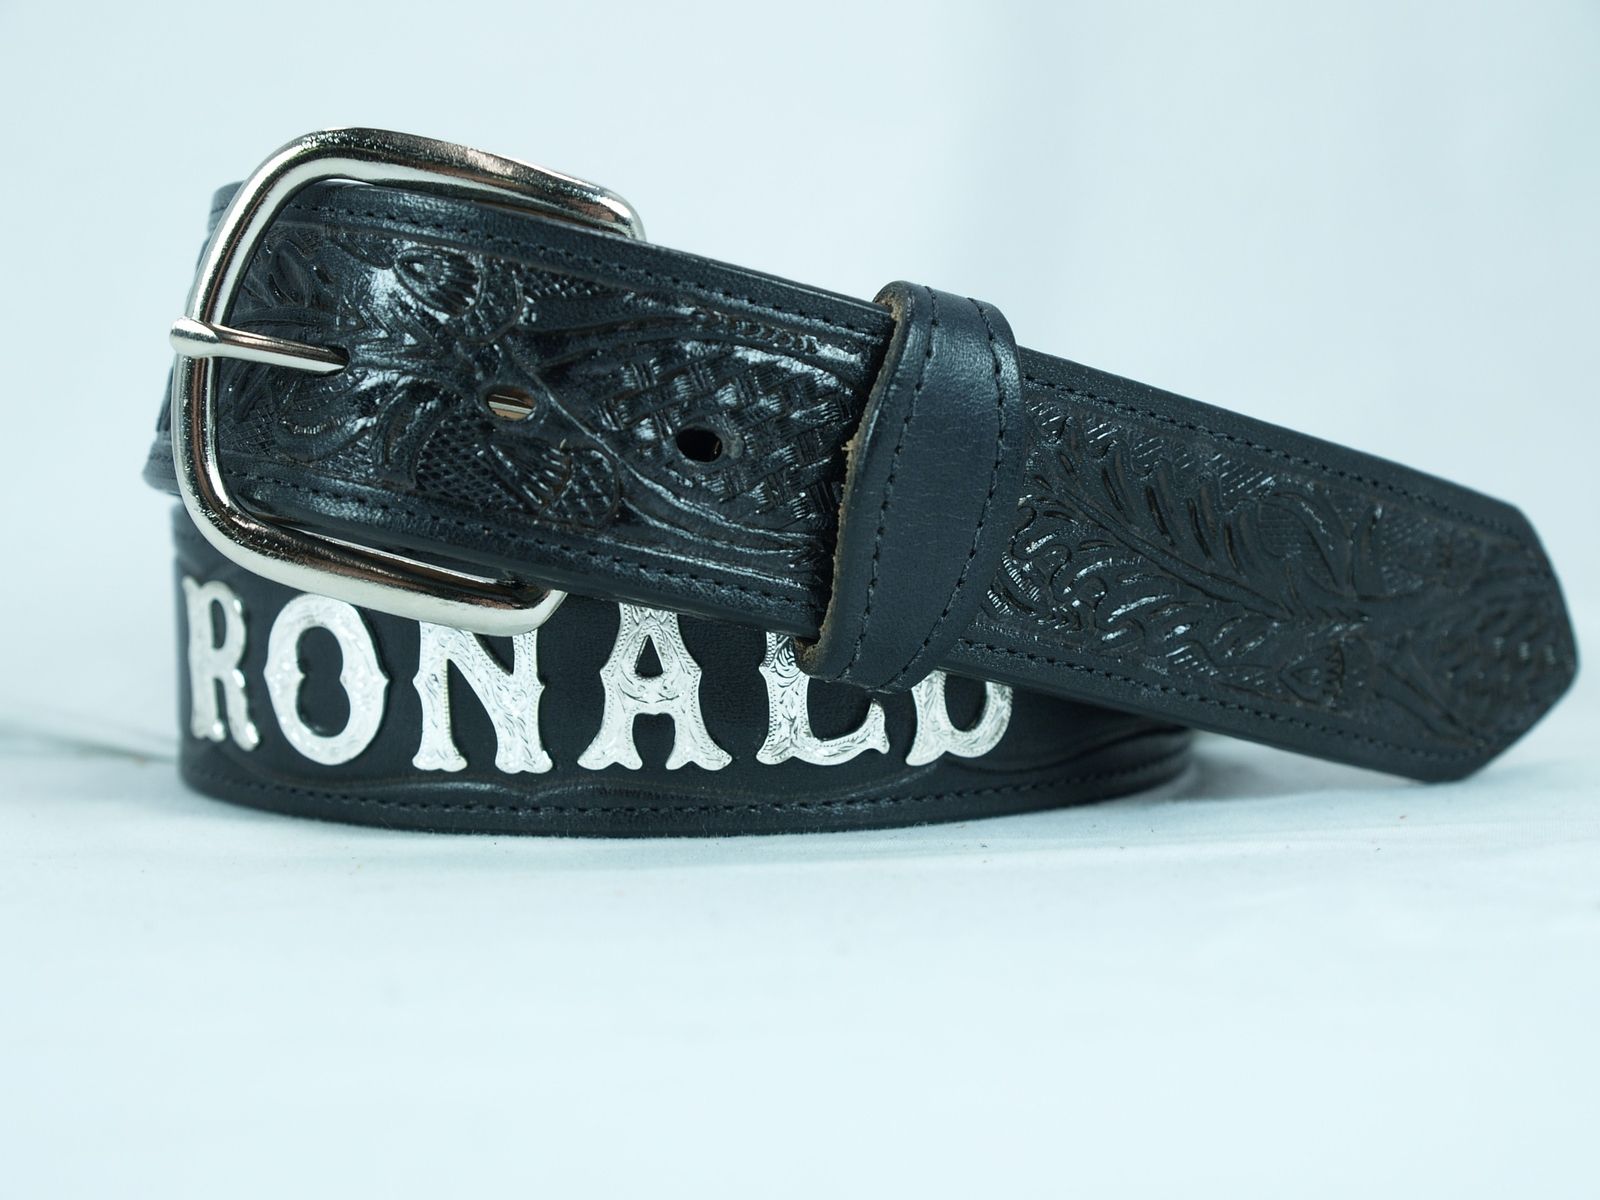 Handmade Personalized Silver Letter Name Belt by Yourtack | CustomMade.com